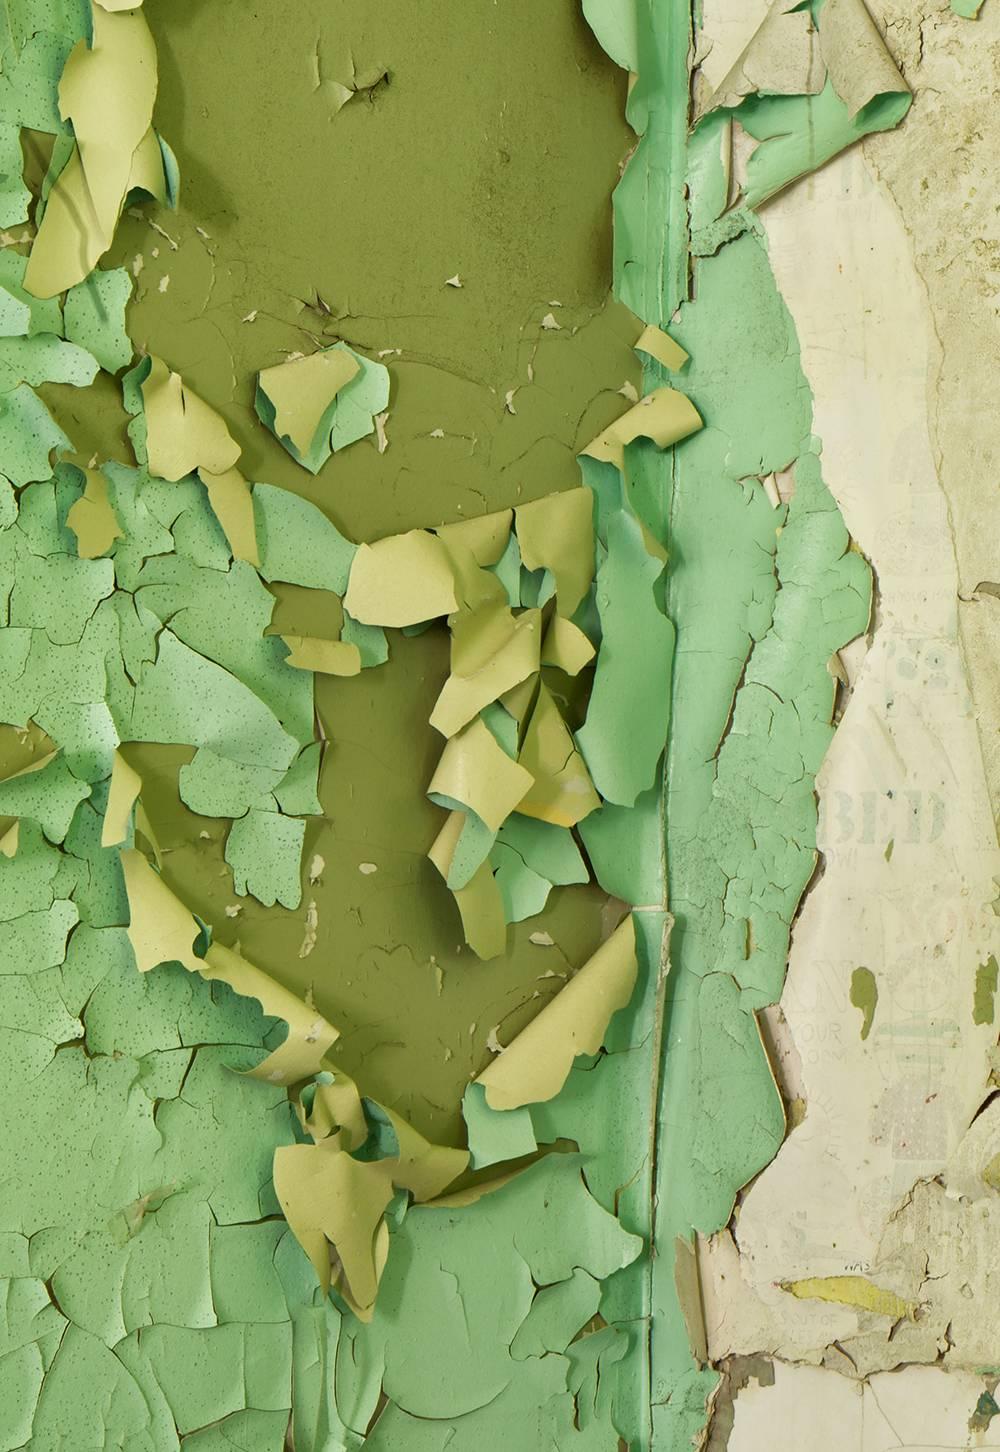 Rebecca Skinner’s “Rise” was photographed in an abandoned home in New York. Nature is reclaiming this room full of peeling paint in greens, pinks and beiges. The 24 x 16 inch color photo with satin finish is infused directly into metal making it